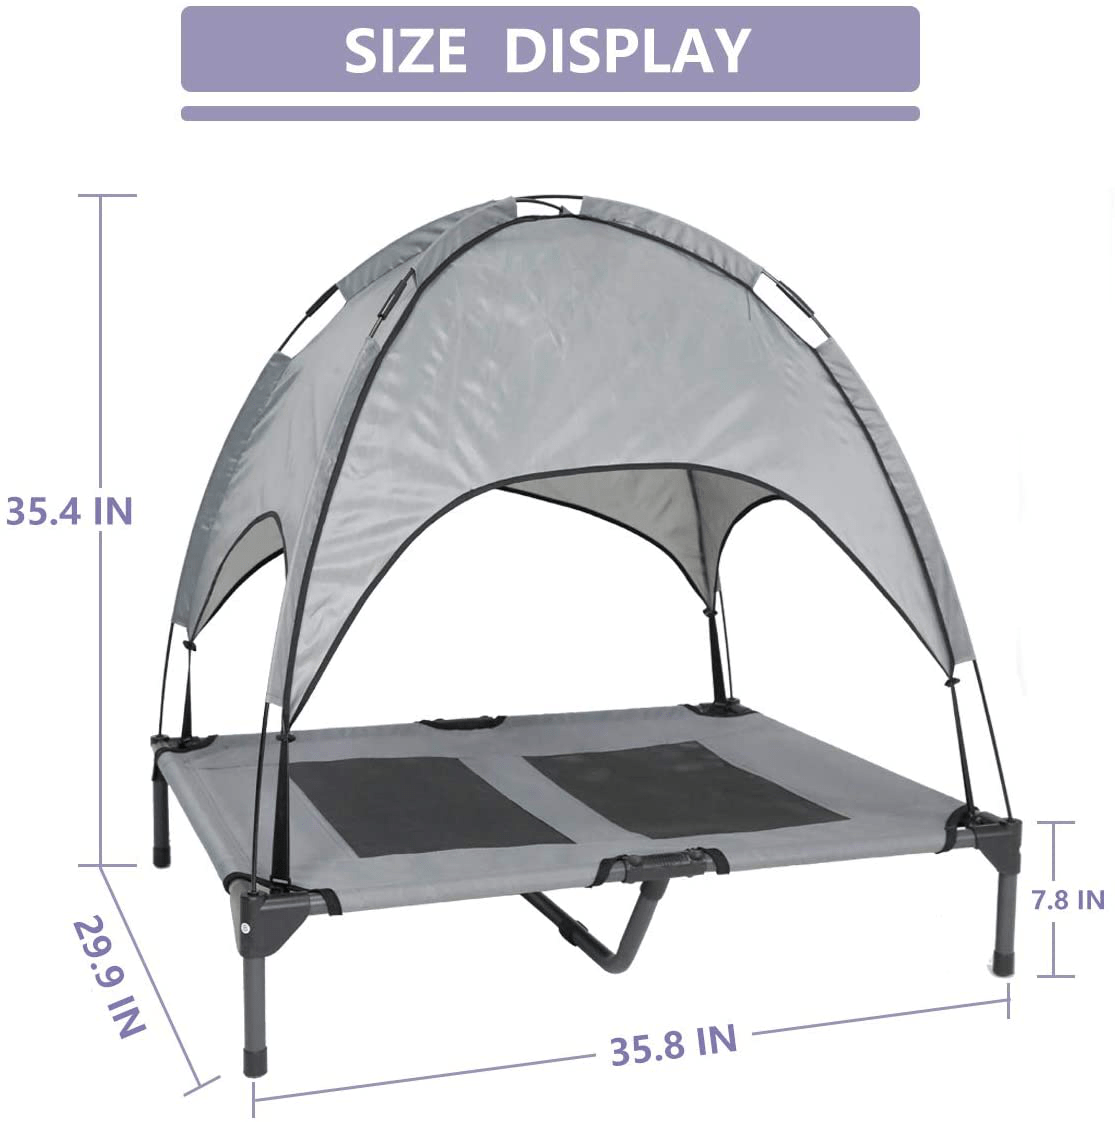 A.FATI Elevated Dog Bed,Cooling Raised Dog Bed Outdoor & Indoor Dog Cot Bed for Large Dogs with Removable Canopy Shade Tent with Extra Bag, Portable for Camping, Traveling, Beach, Training Use